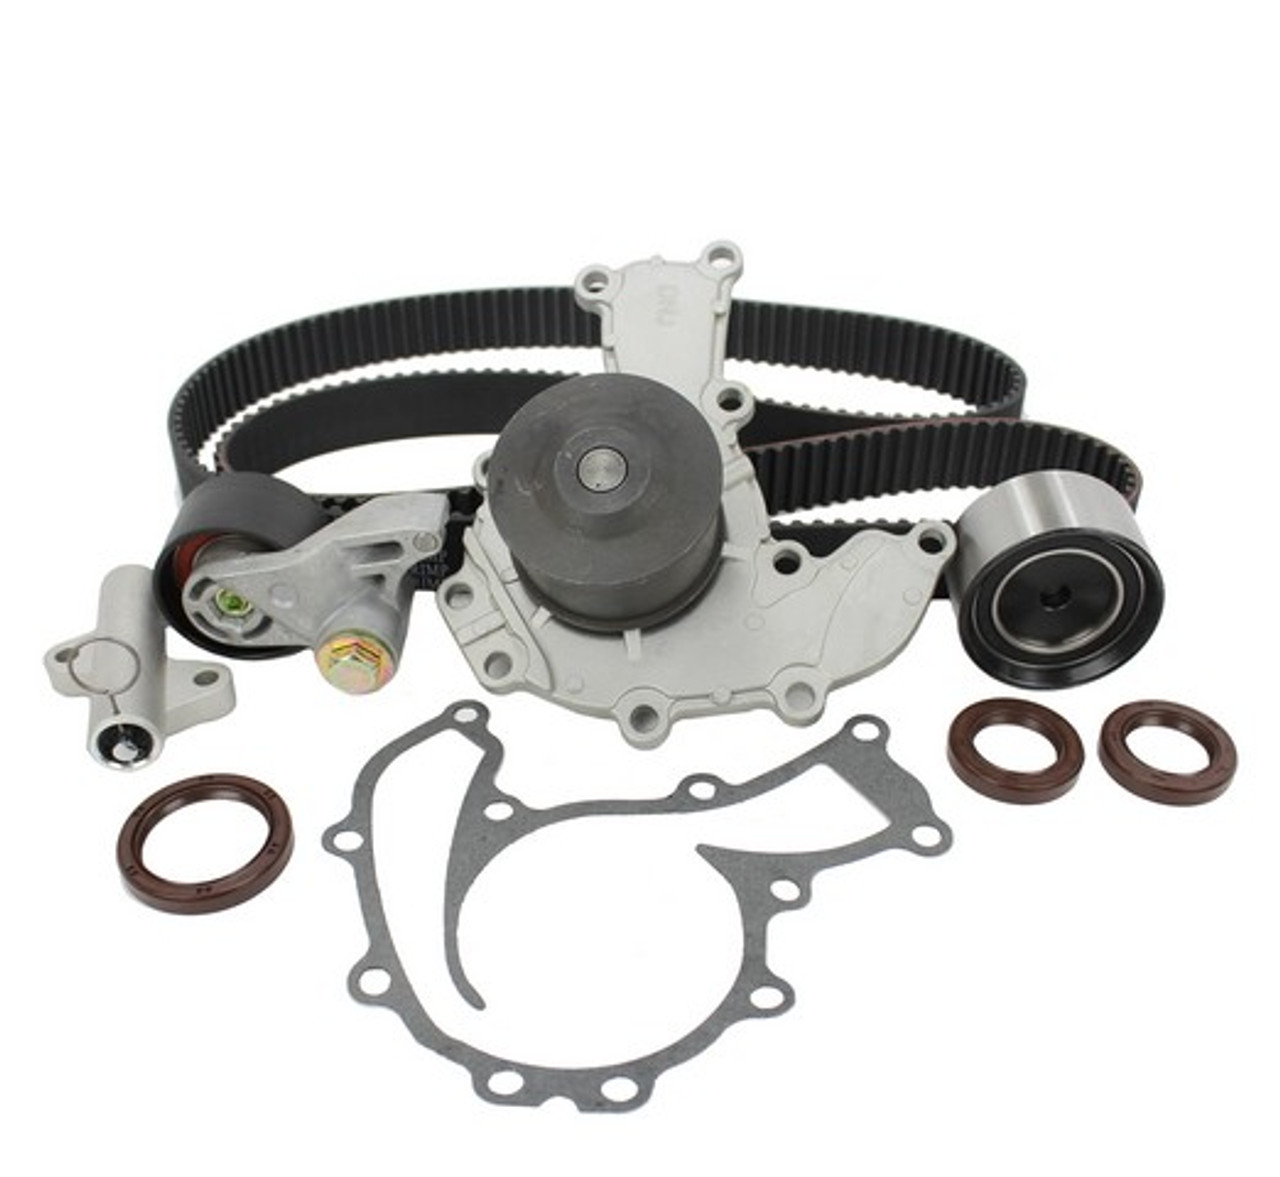 Timing Belt Kit with Water Pump 3.2L 1996 Acura SLX - TBK351WP.1